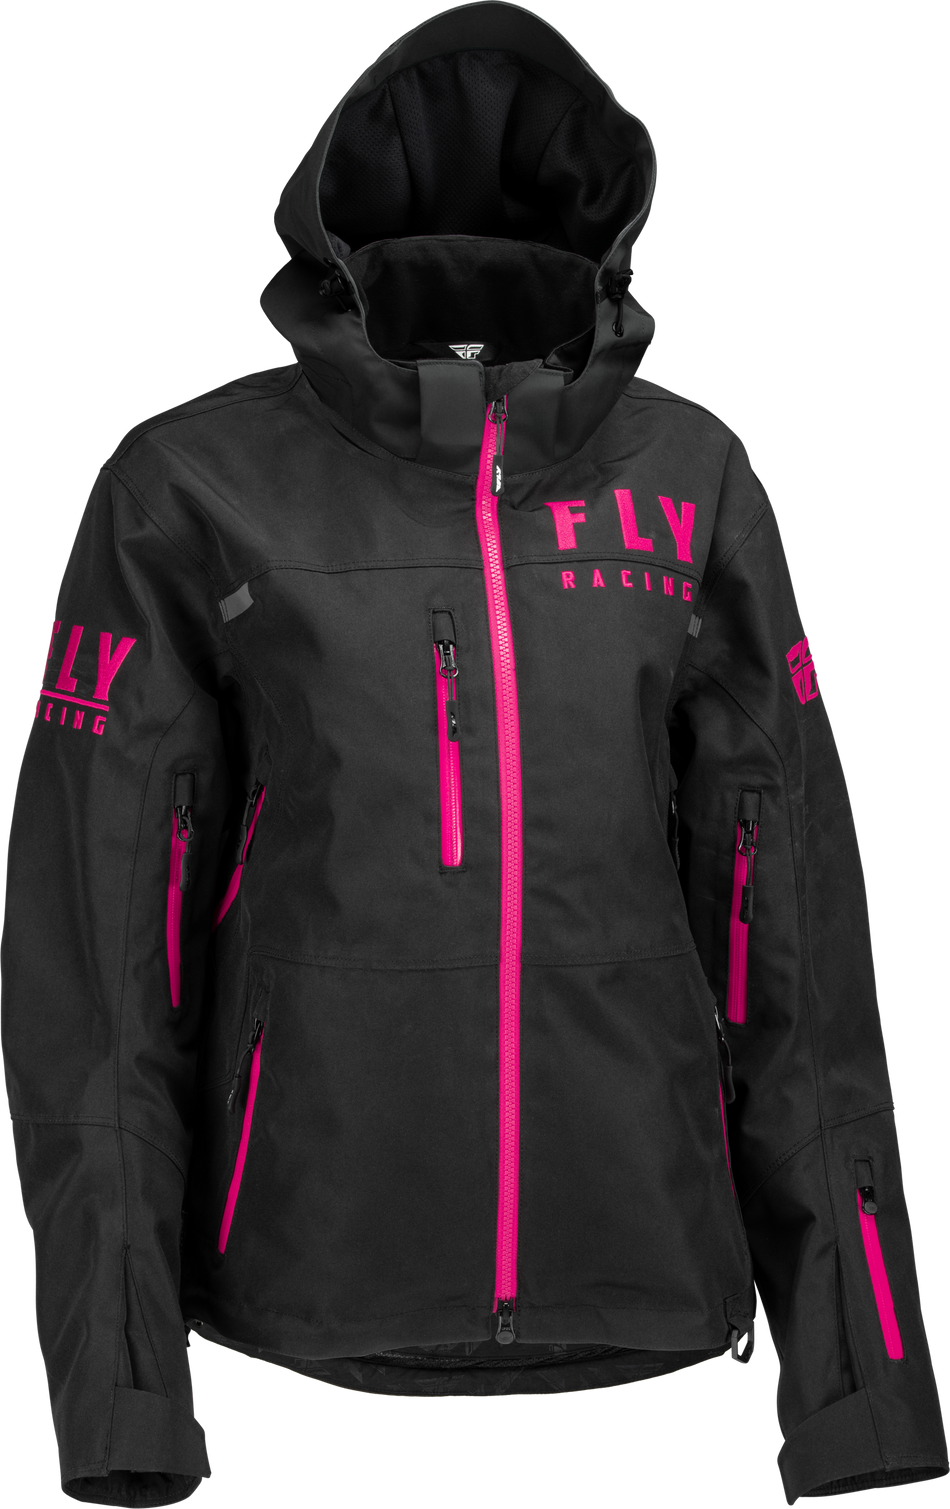 FLY RACING Women's Carbon Jacket Black/Pink Sm 470-4502S